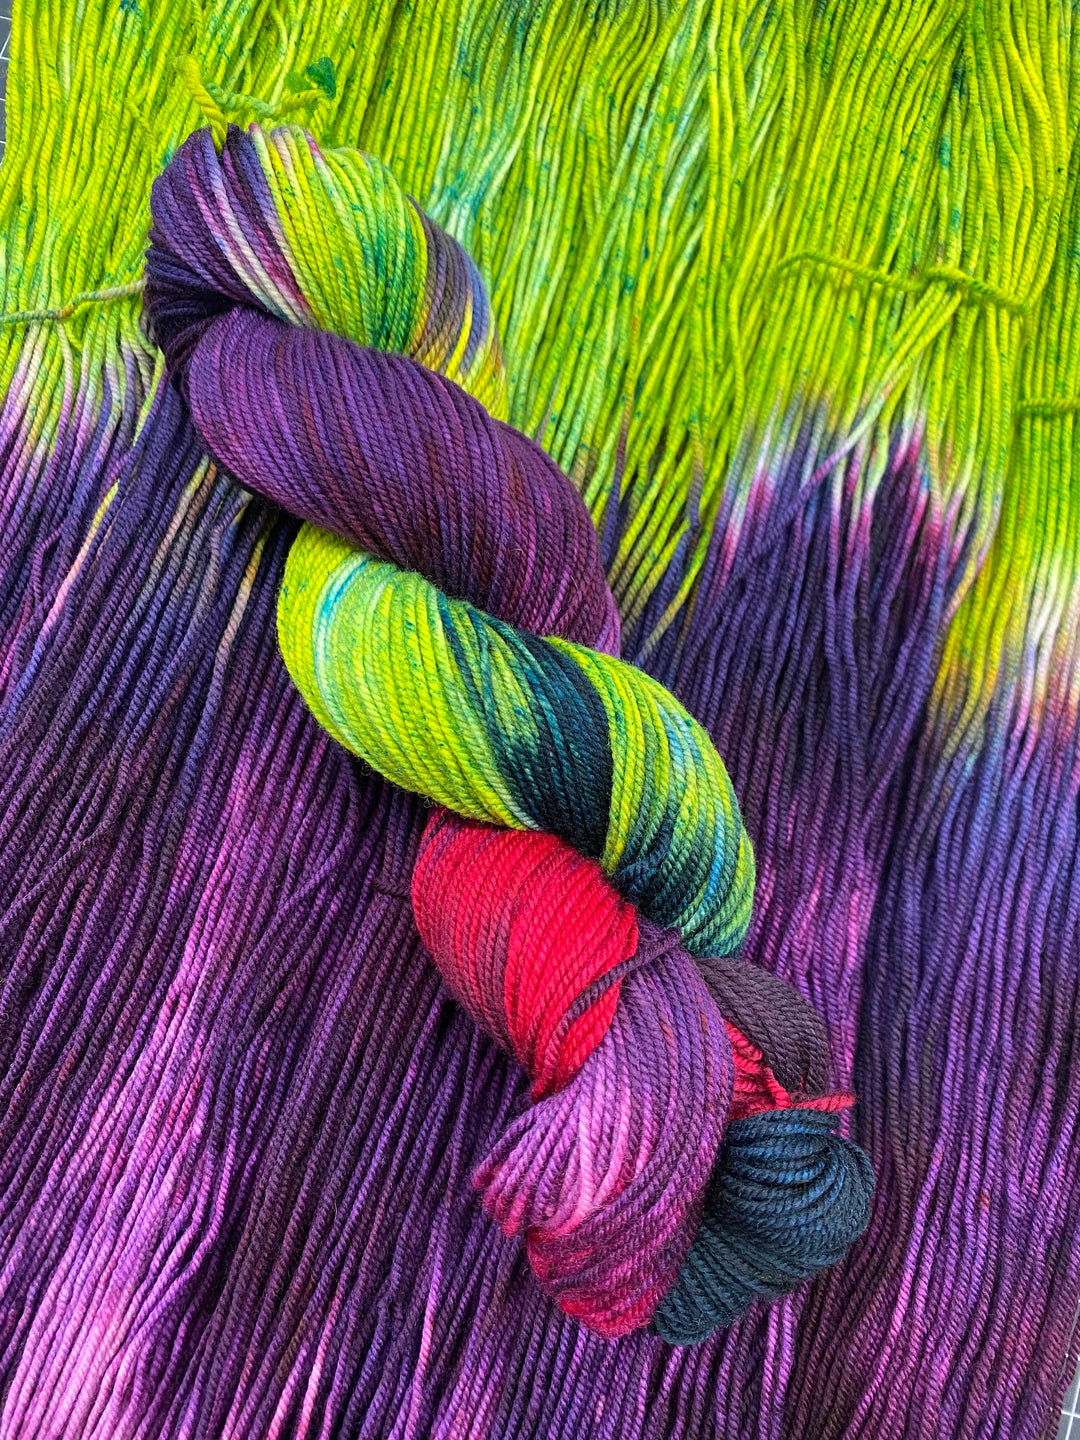 Deep Roots- Hand dyed yarn - Mohair - Fingering - Sock - DK - Sport - Worsted - Bulky - Variegated yarn